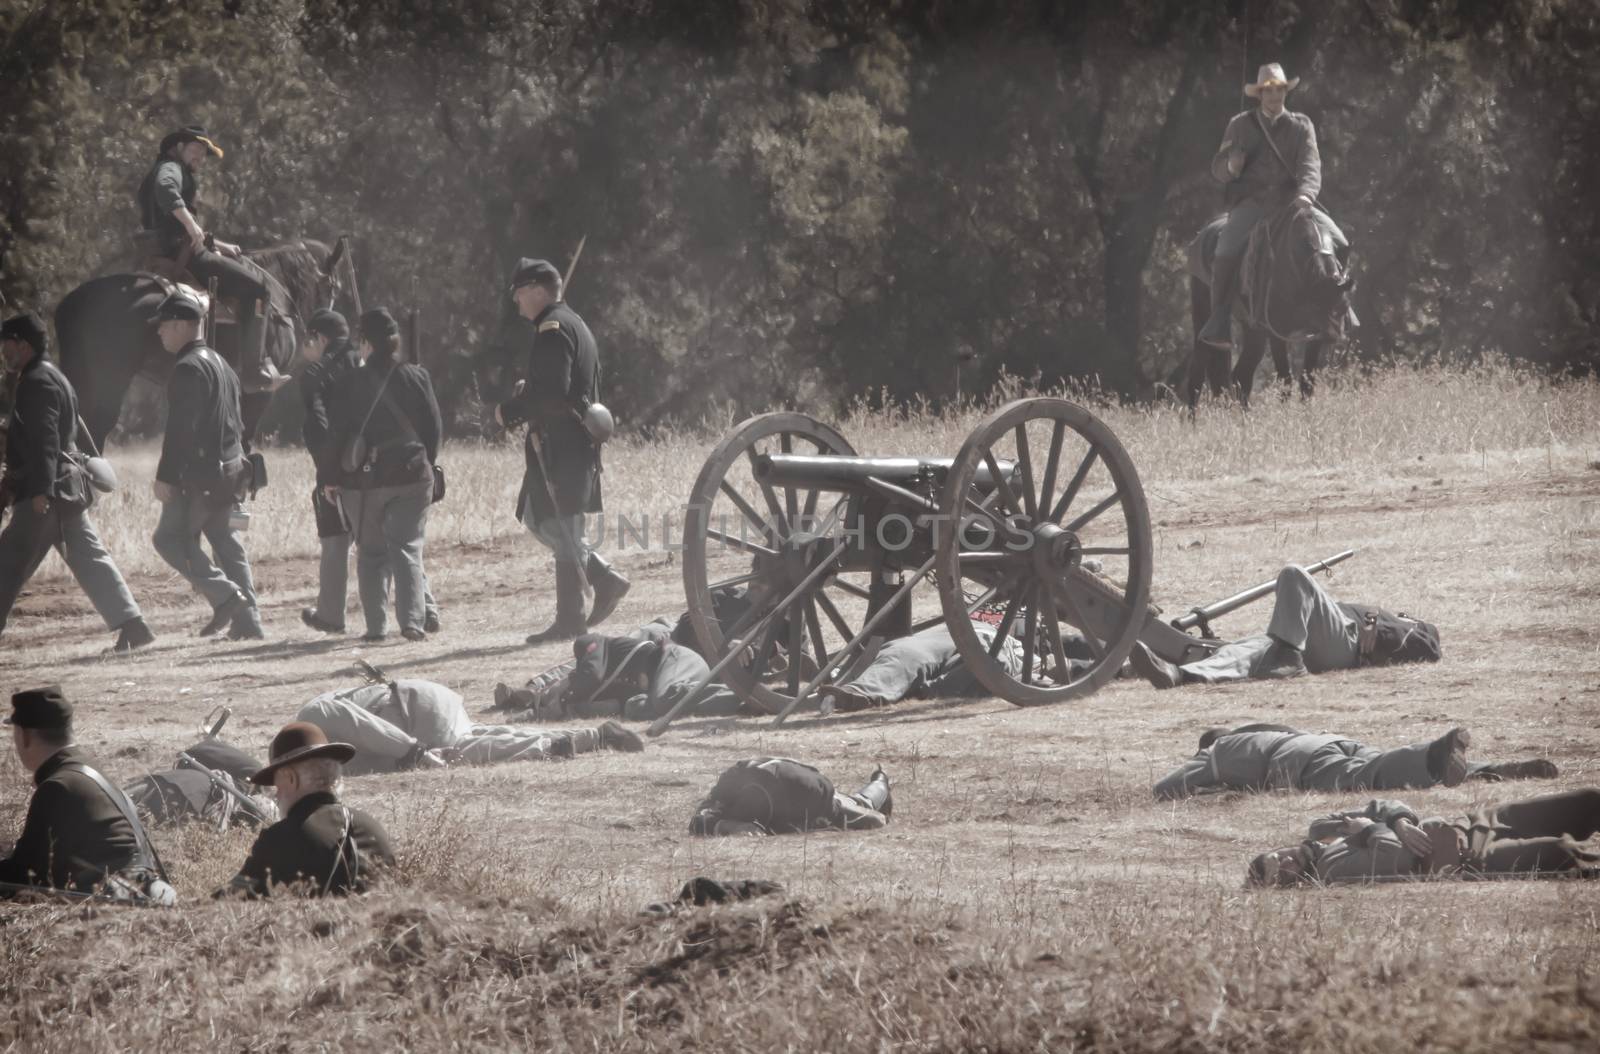 Union and Confederate wounded or dead soldiers litter the battlefield during a Civil War Reenactment at Anderson, California.
Photo taken on: September 27th, 2014